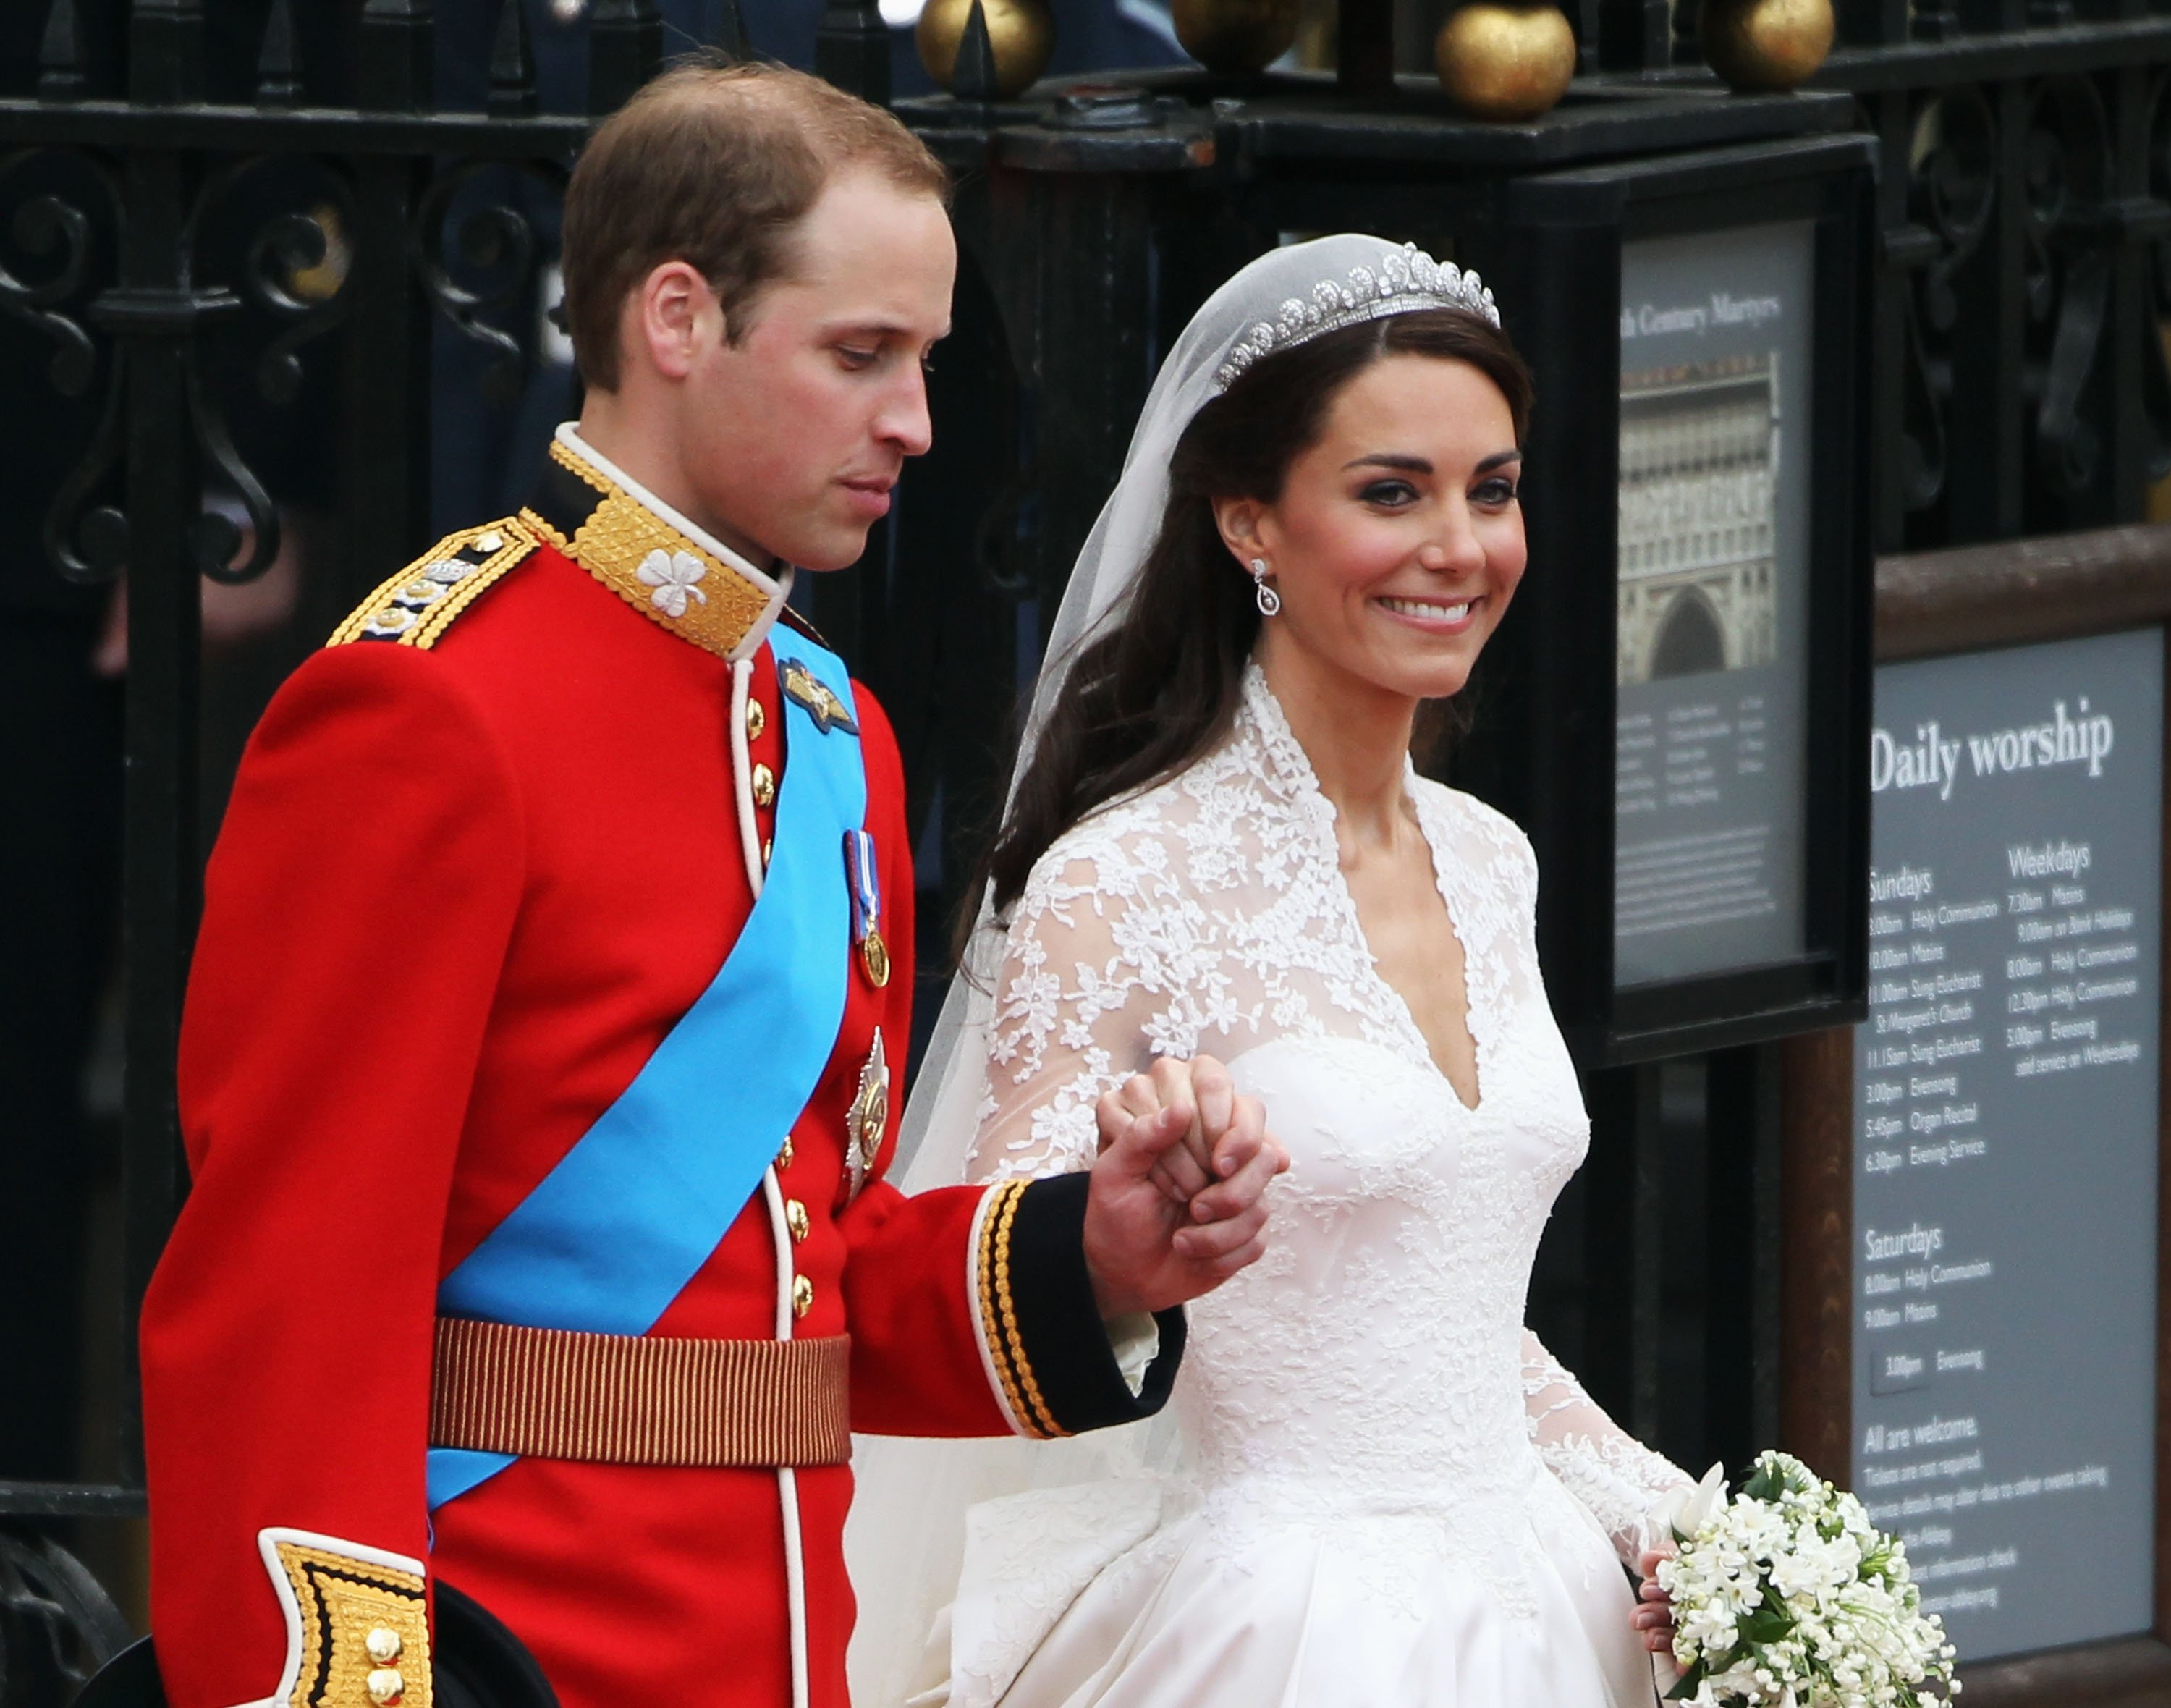 Prince William and his wife Kate, Duchess of Cambridge (Kate Middleton) at their wedding on April 29, 2011, at Westminster Abbey in London | Source: Getty Images)